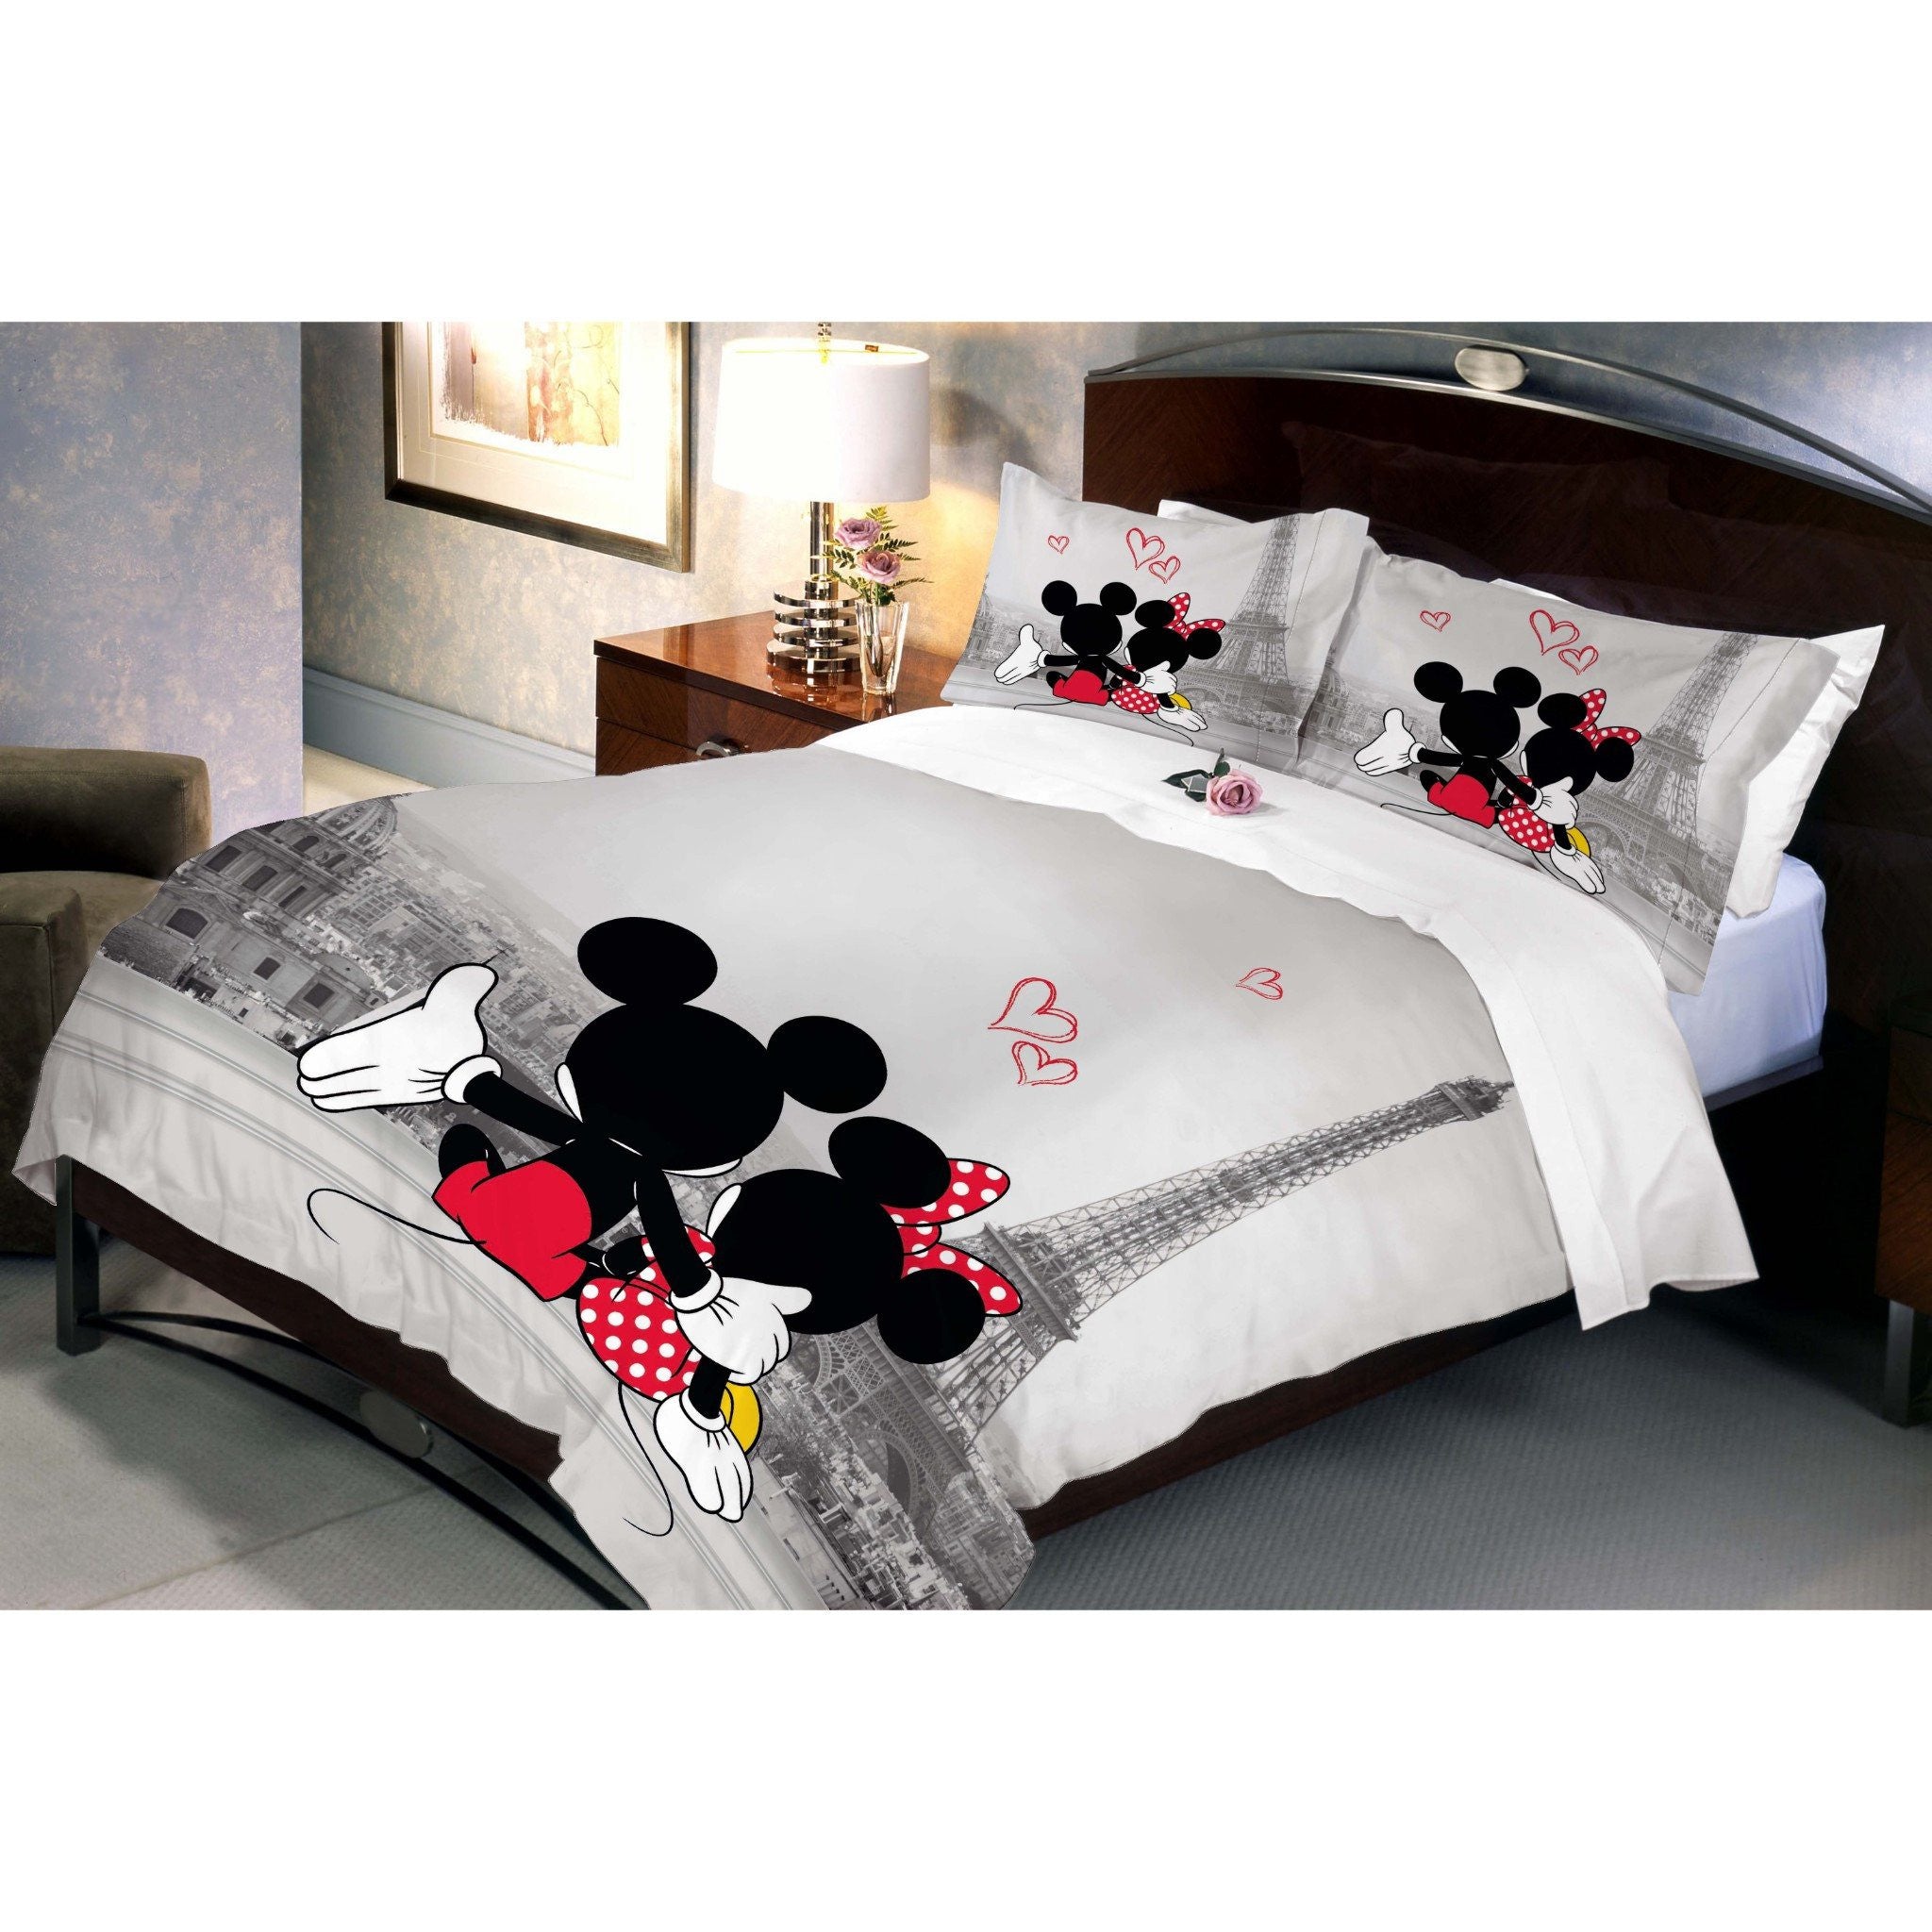 Disney Mickey Minnie Bed Sheet With Pillow Covers Uber Urban